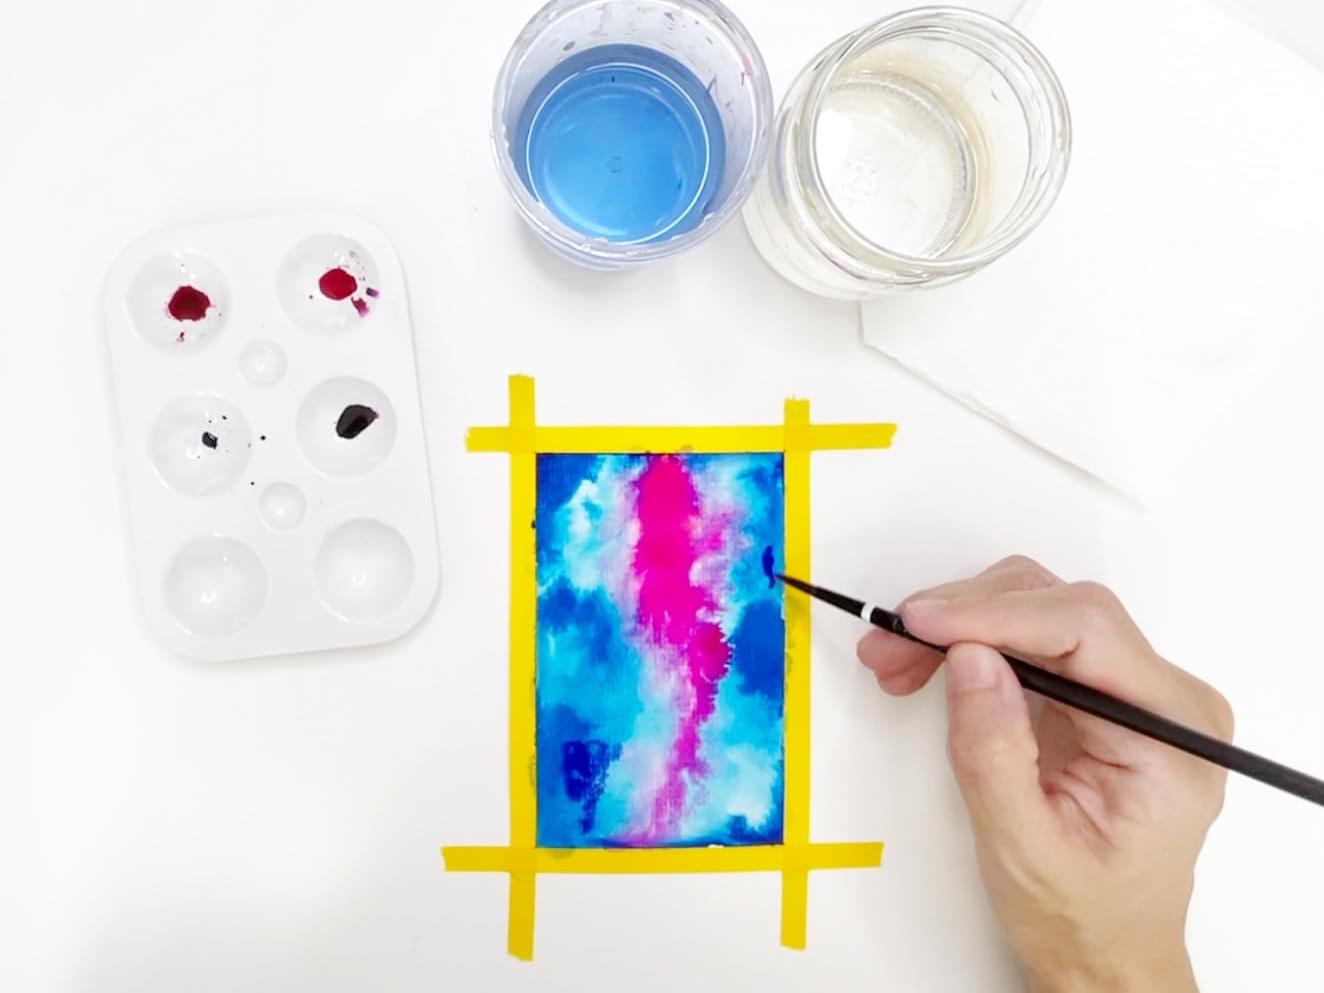 how_to_paint_a_watercolour_galaxy_sky_tutorial